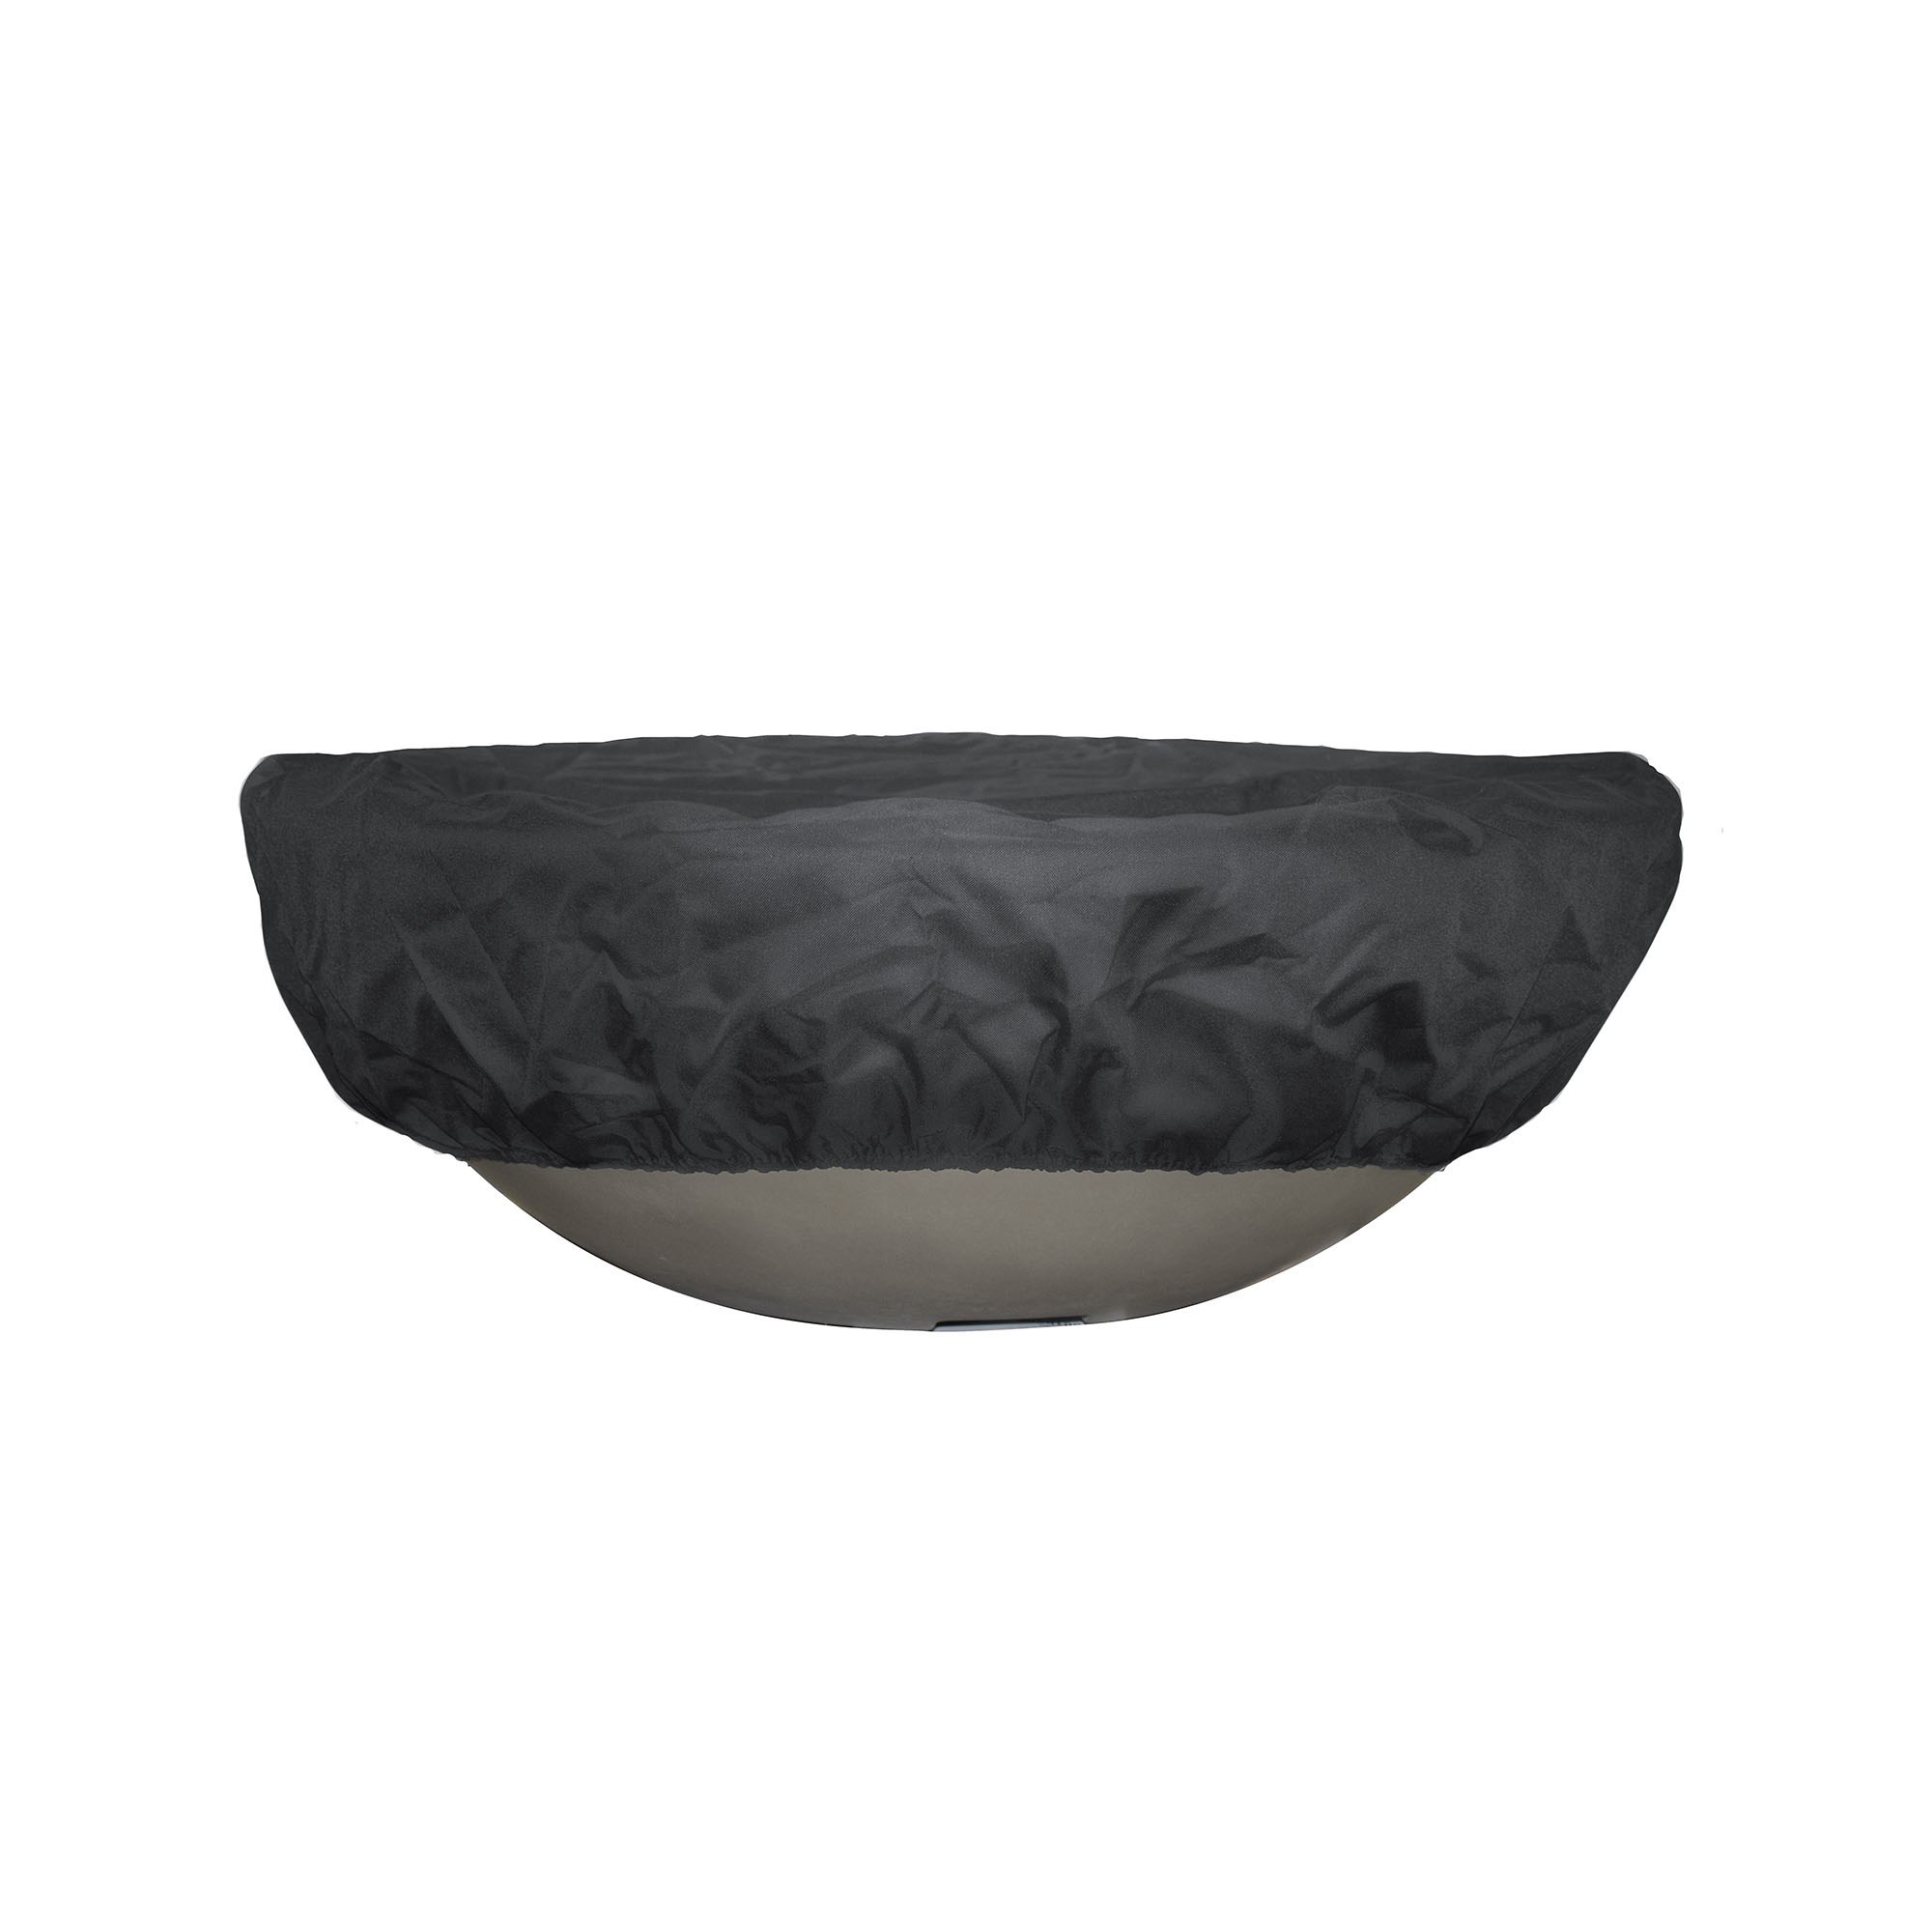 Round Fire Pit And Bowl Canvas Cover, Canvas Fire Pit Cover